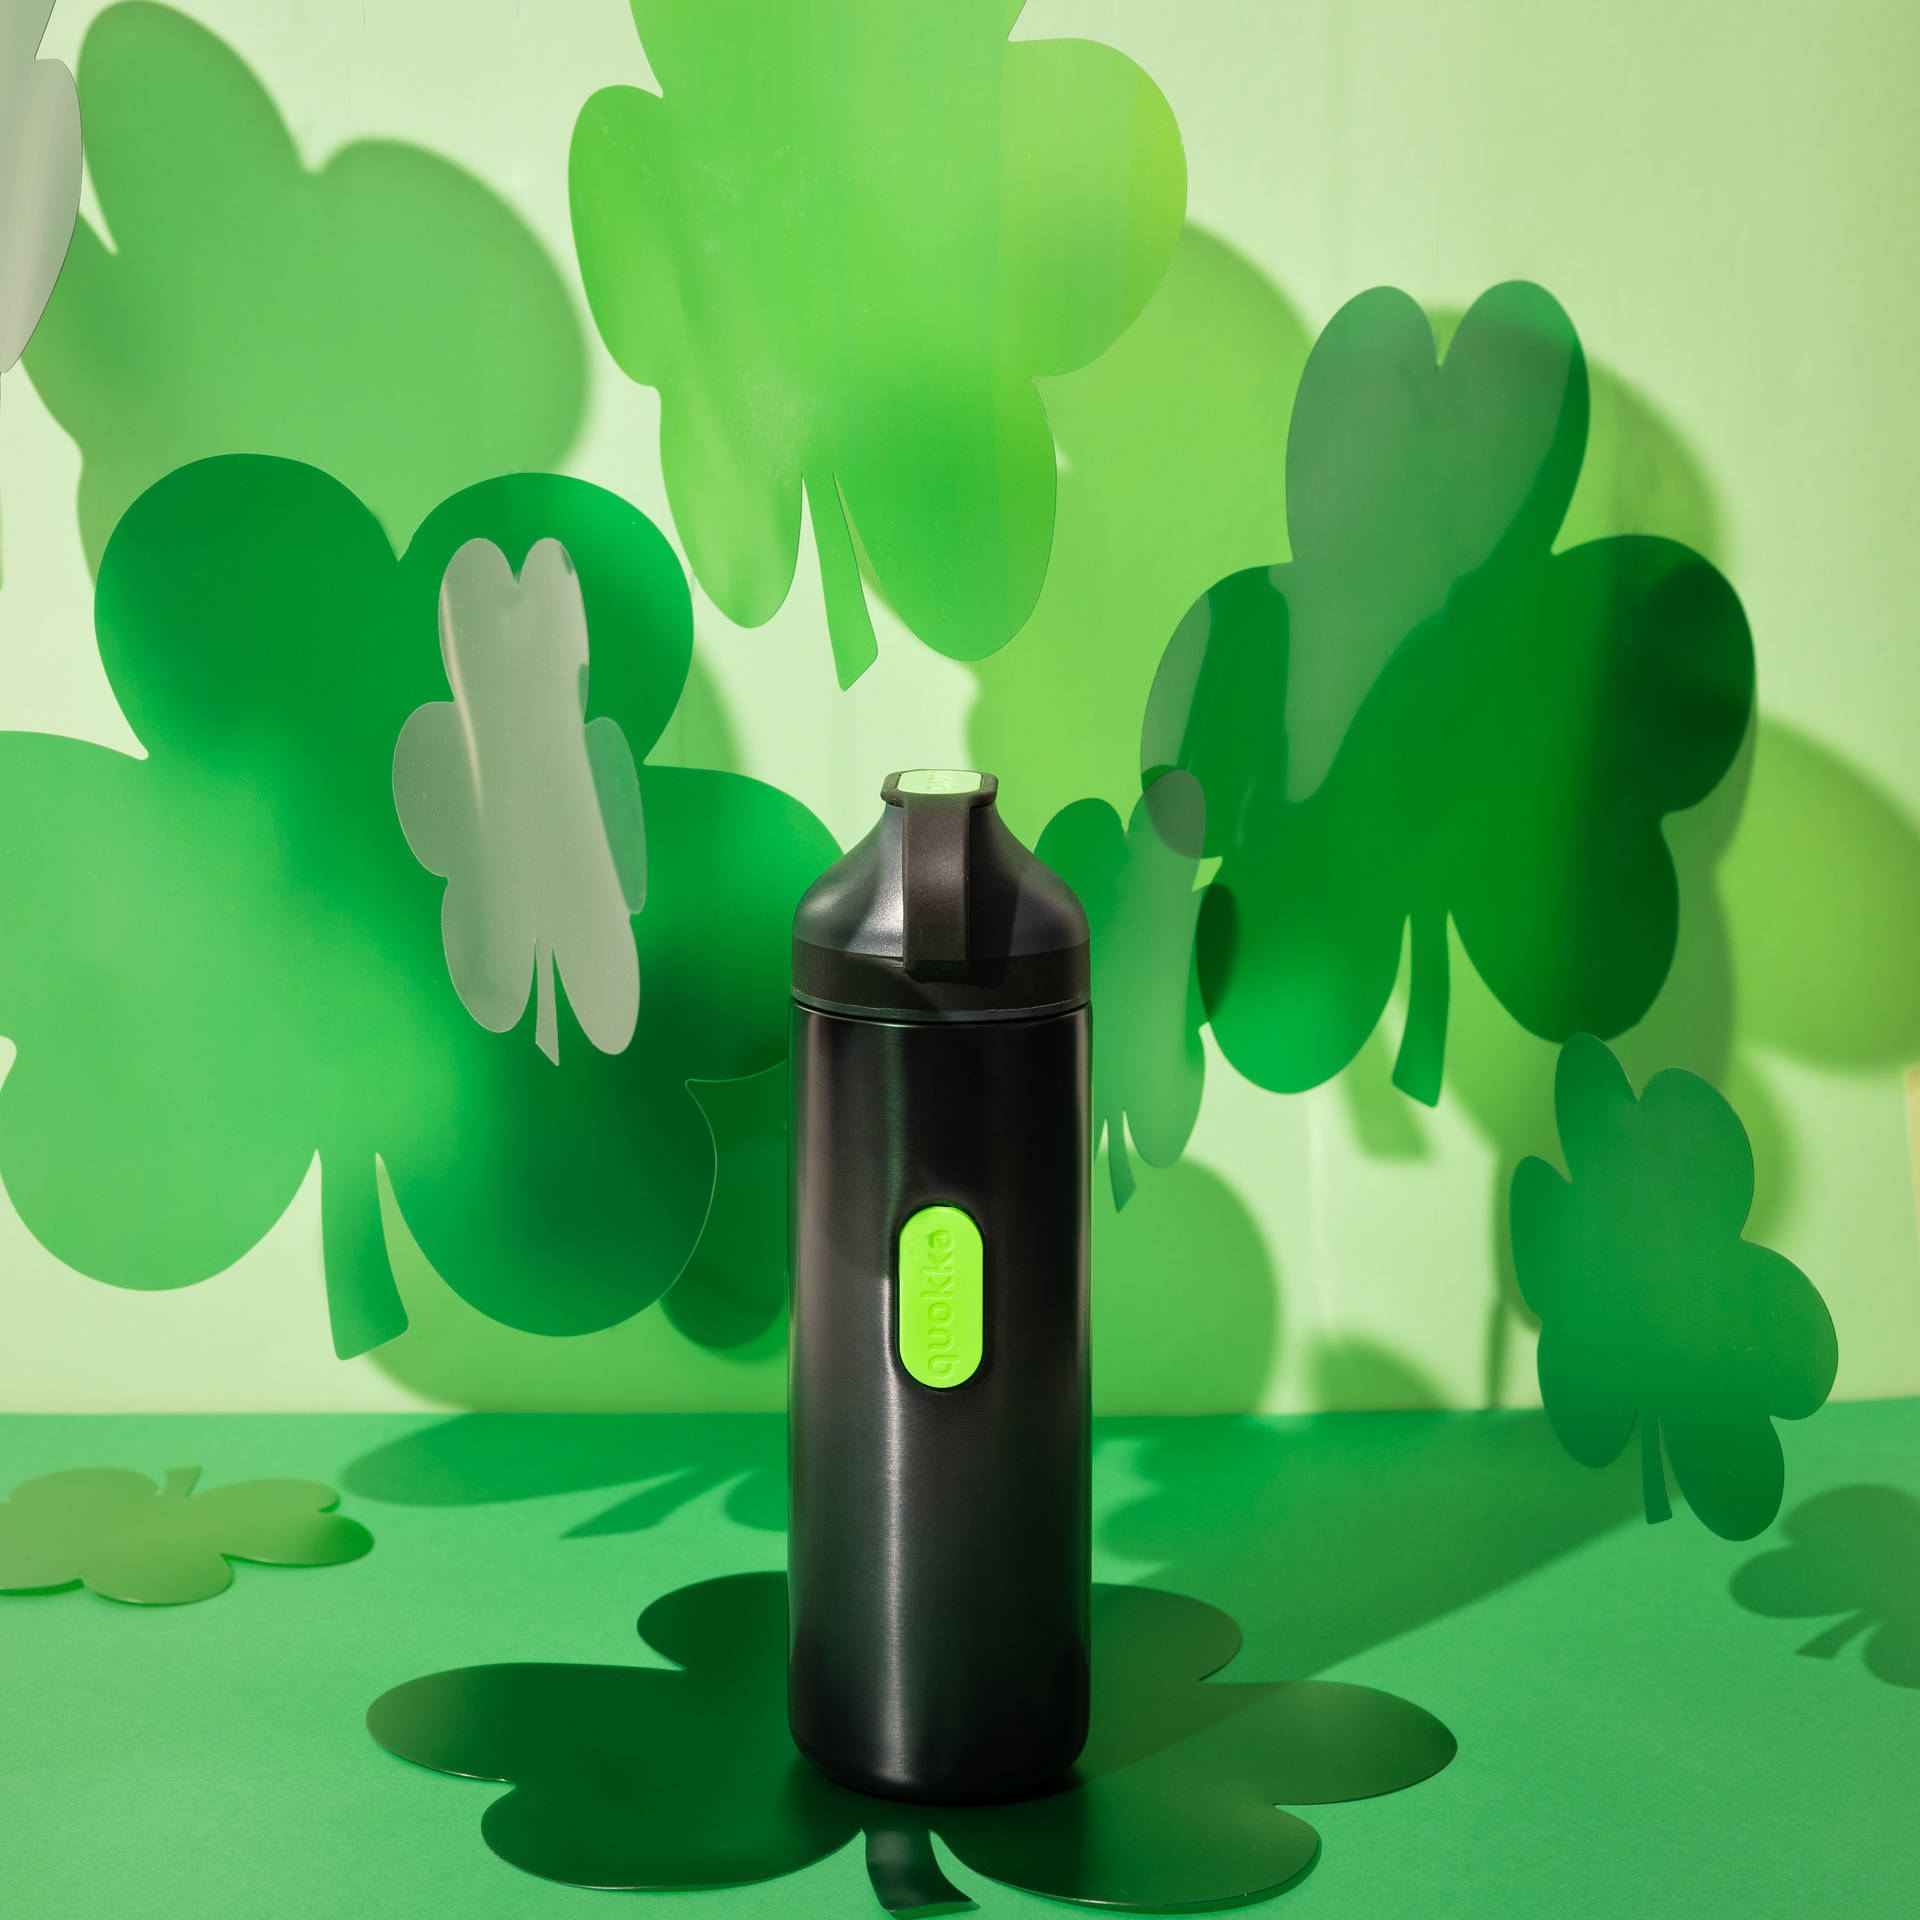 Black Water Bottle With Saint Patrick’s Day Imagery